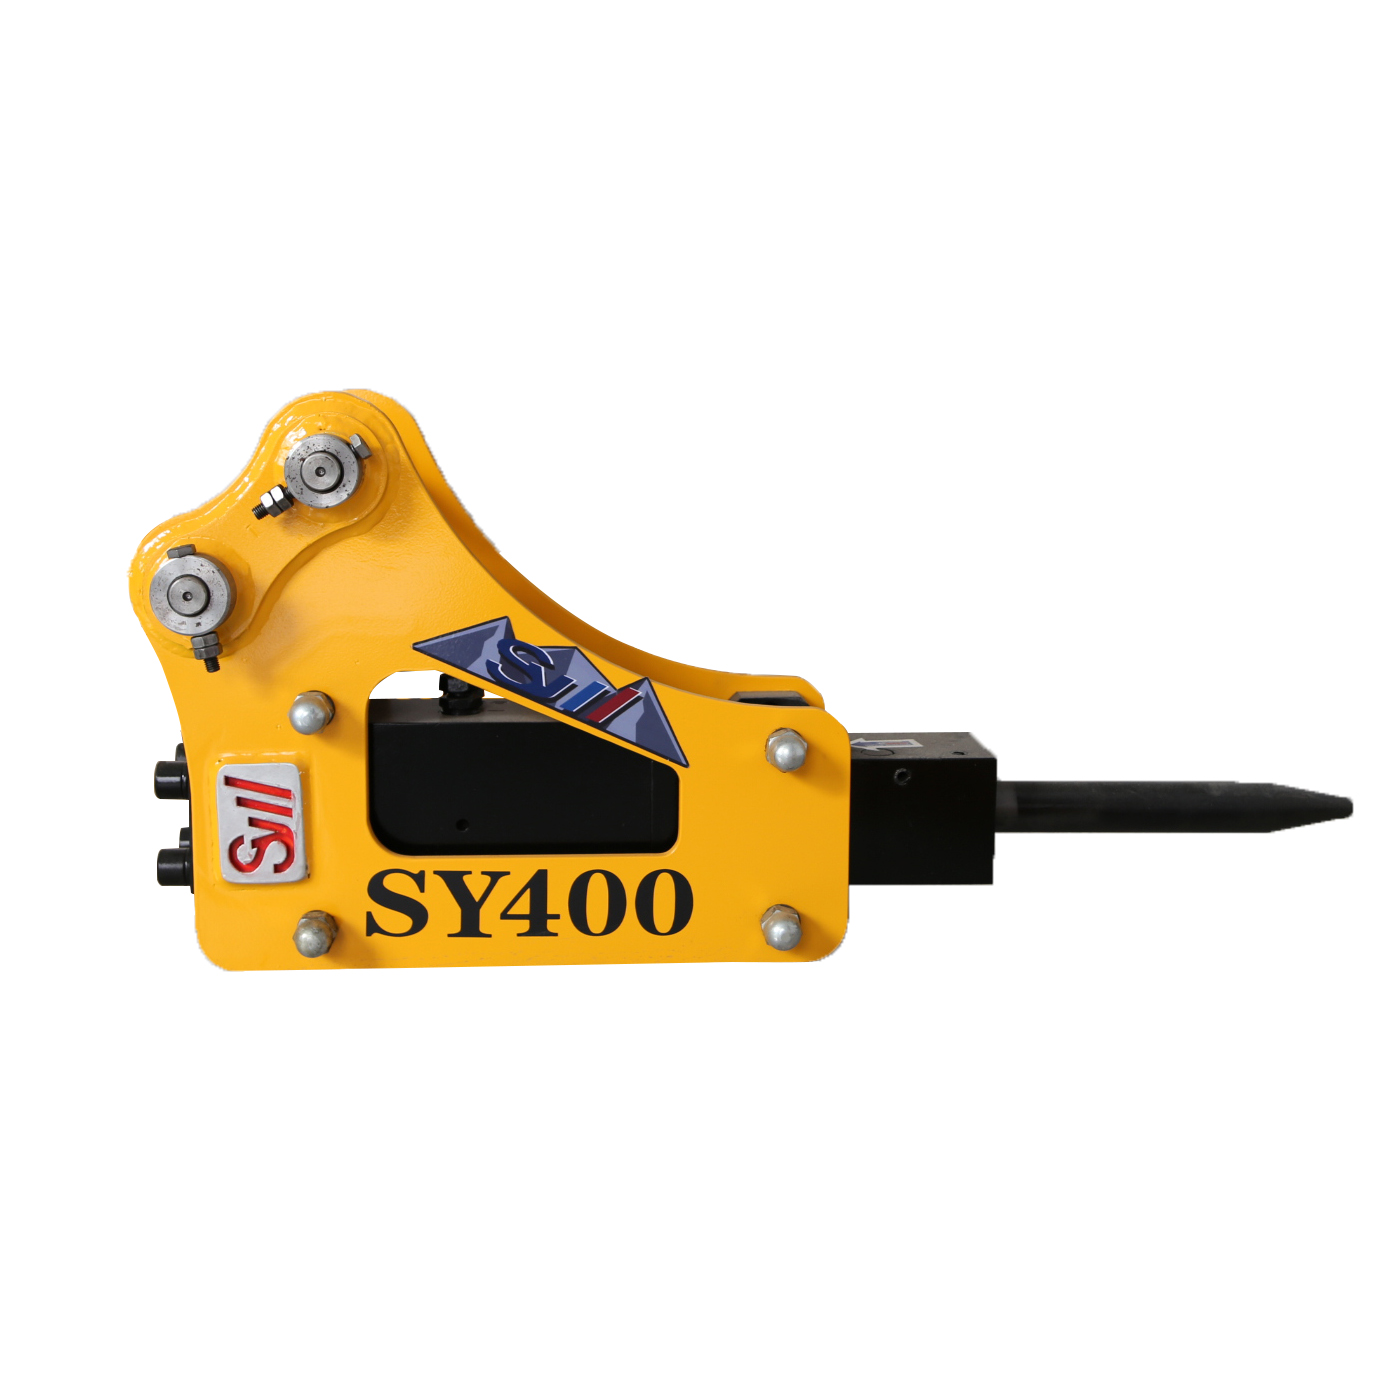 OEM Manufacturer Excavator With Jackhammer Attachment - SY400 side type hydraulic breaker – Sanyu